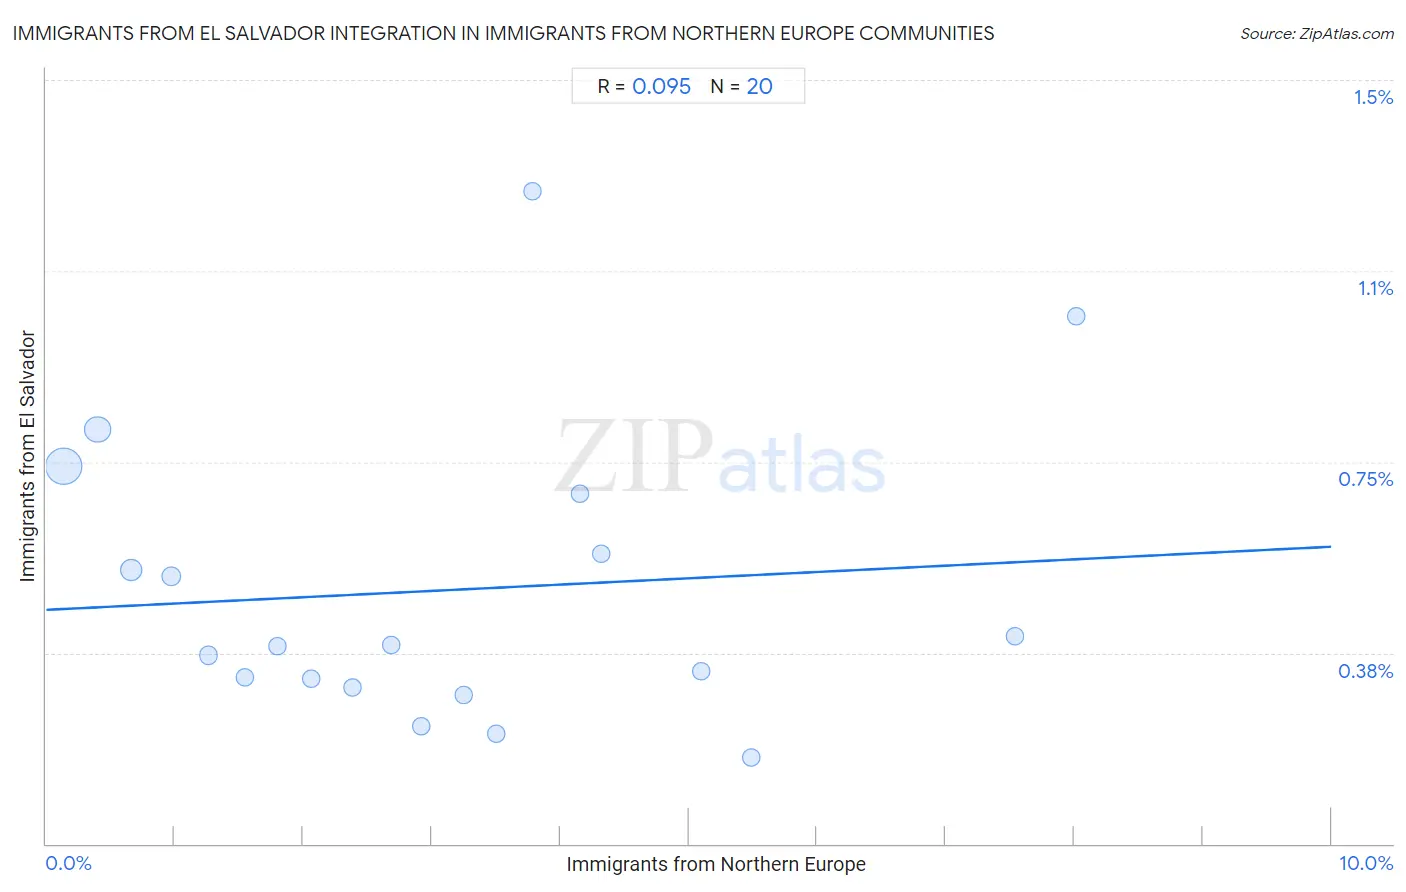 Immigrants from Northern Europe Integration in Immigrants from El Salvador Communities